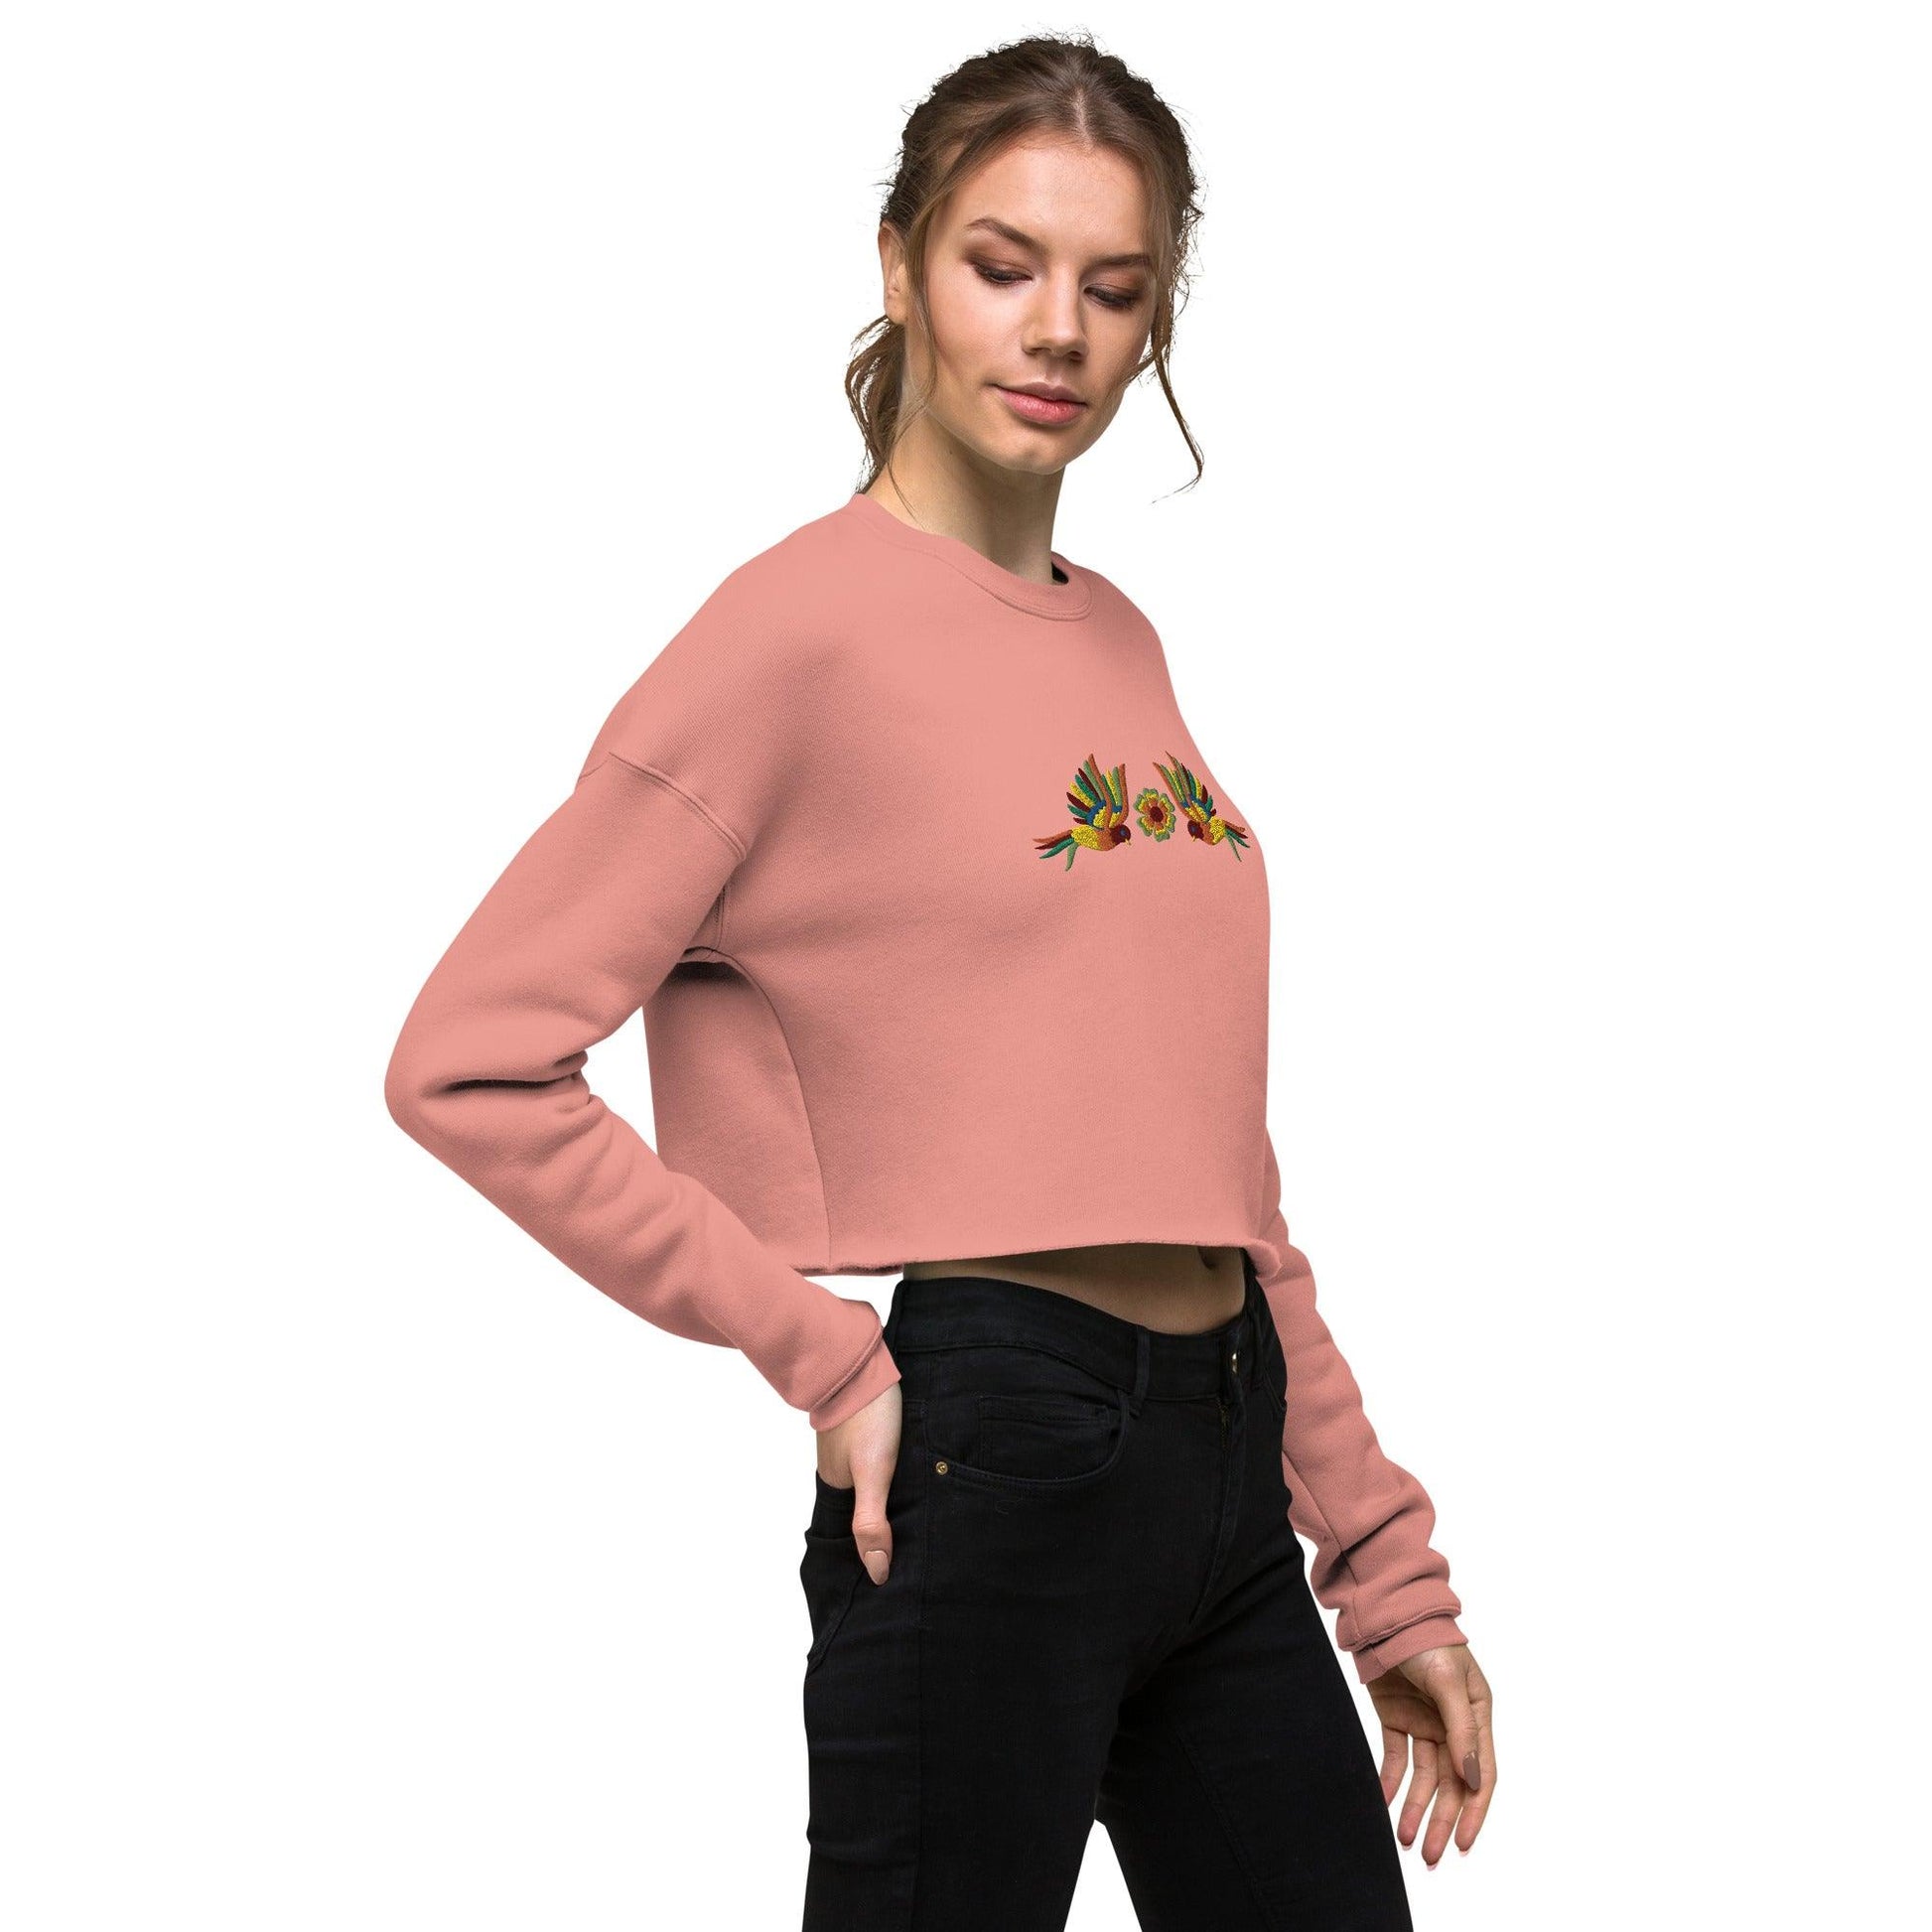 Mexican Otomi Cropped Sweatshirt - The Global Wanderer